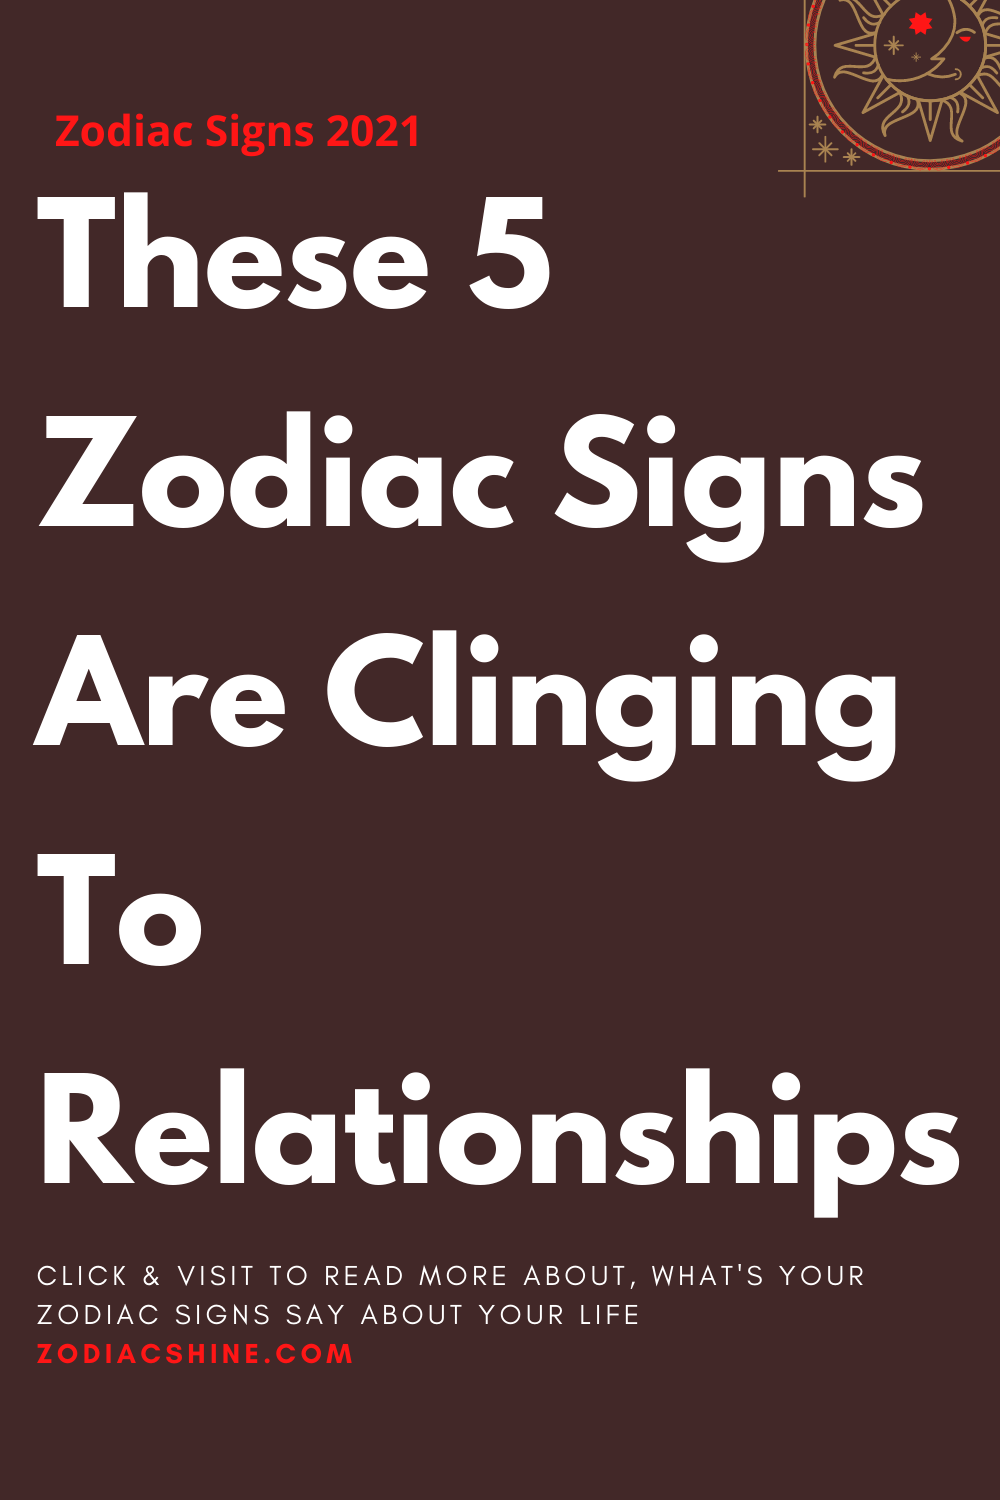 These 5 Zodiac Signs Are Clinging To Relationships